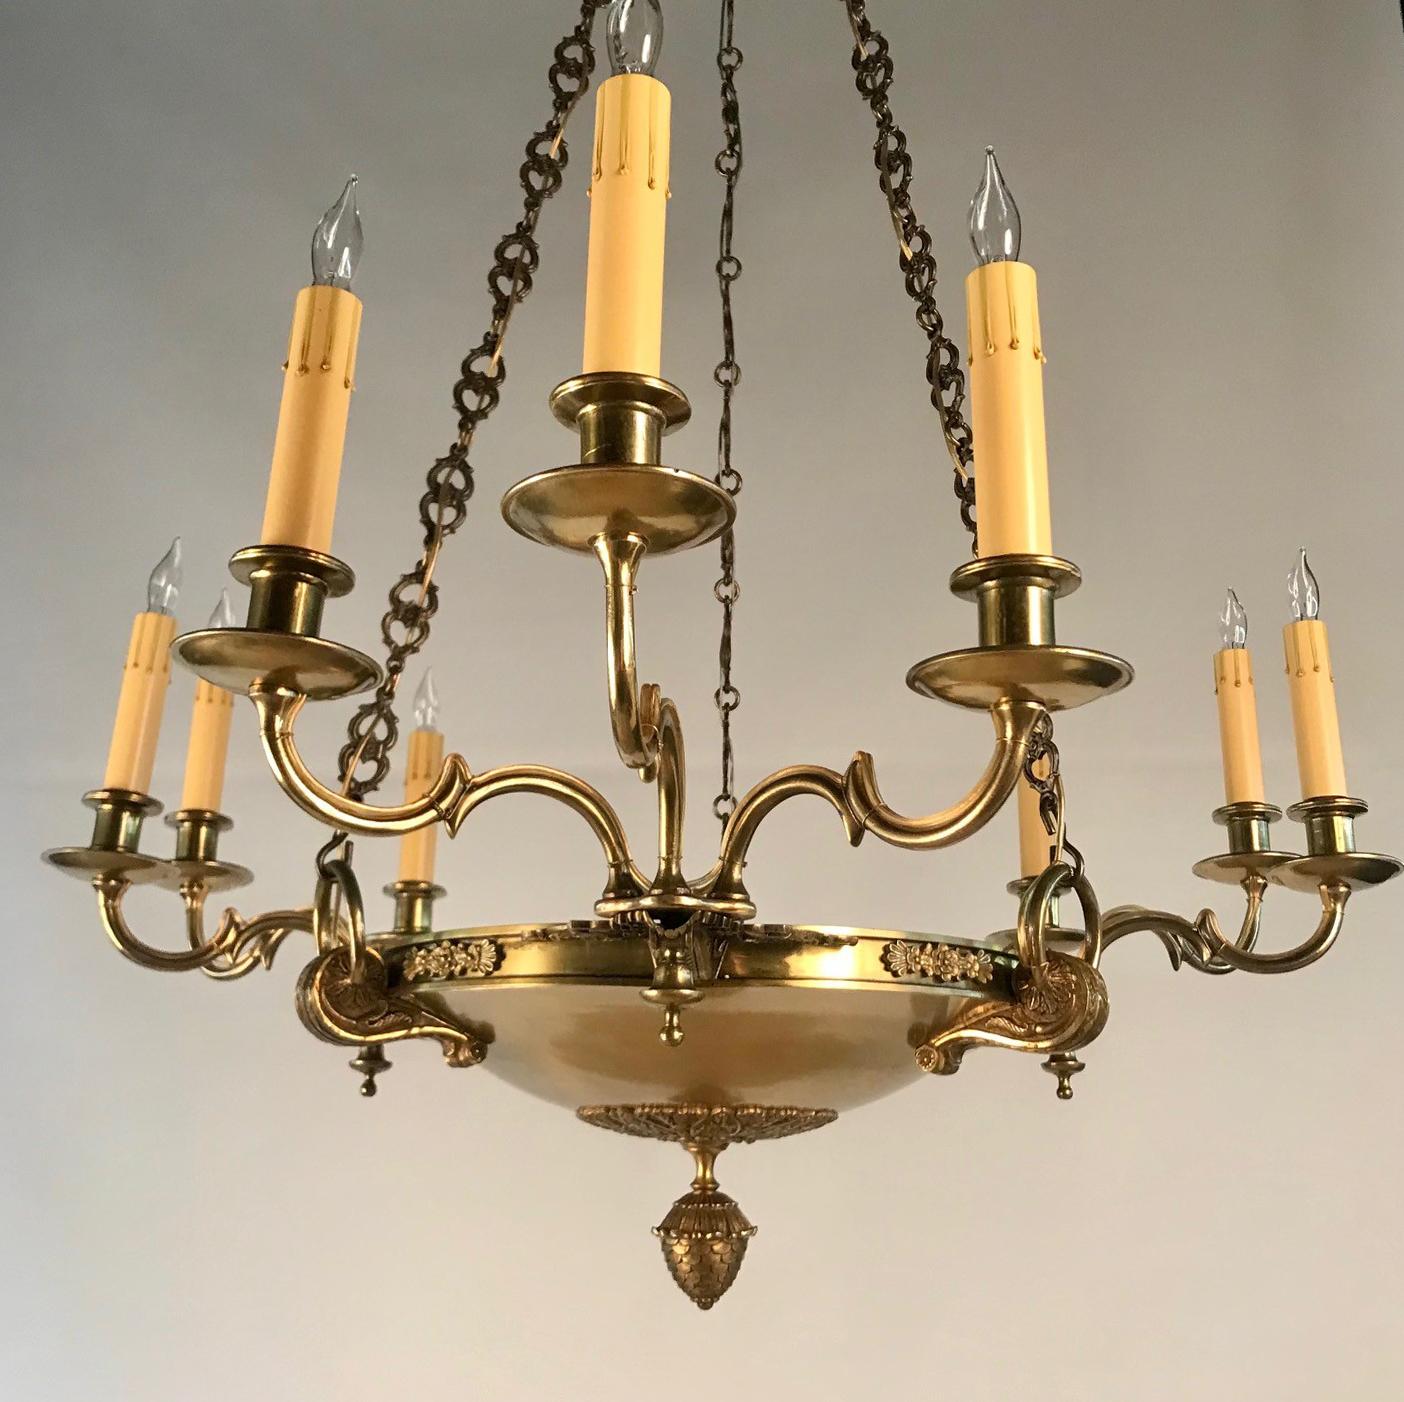 empire style chandeliers